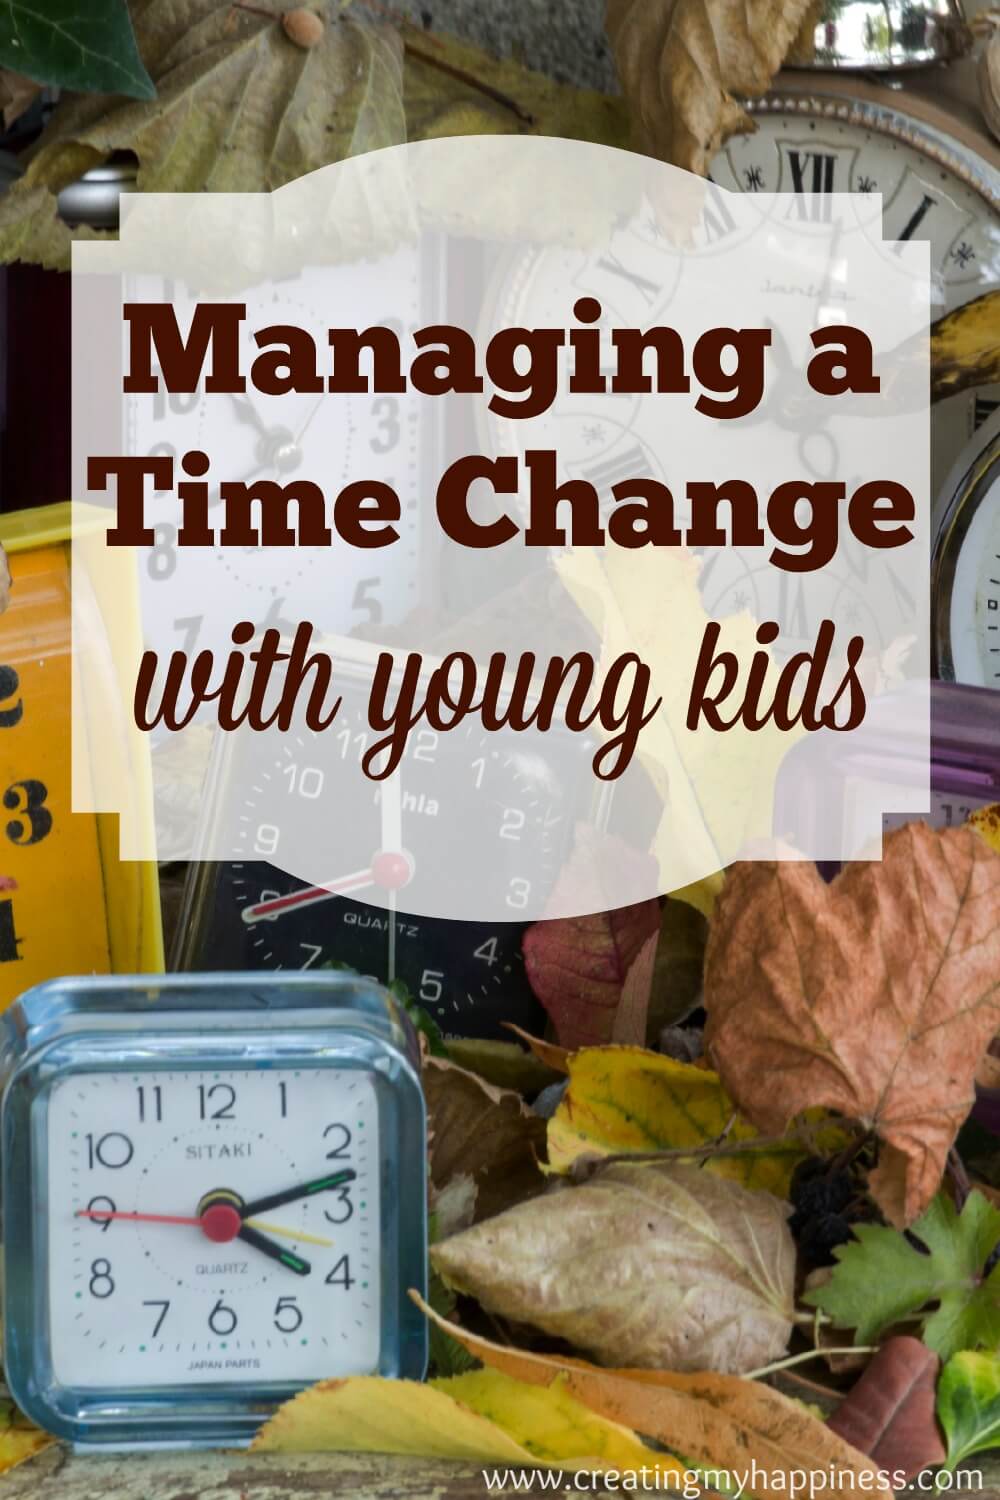 A time change can wreak havoc on kids who are very dependent on their schedule. Here are some ways to handle it so your kids don't turn into howler monkeys.